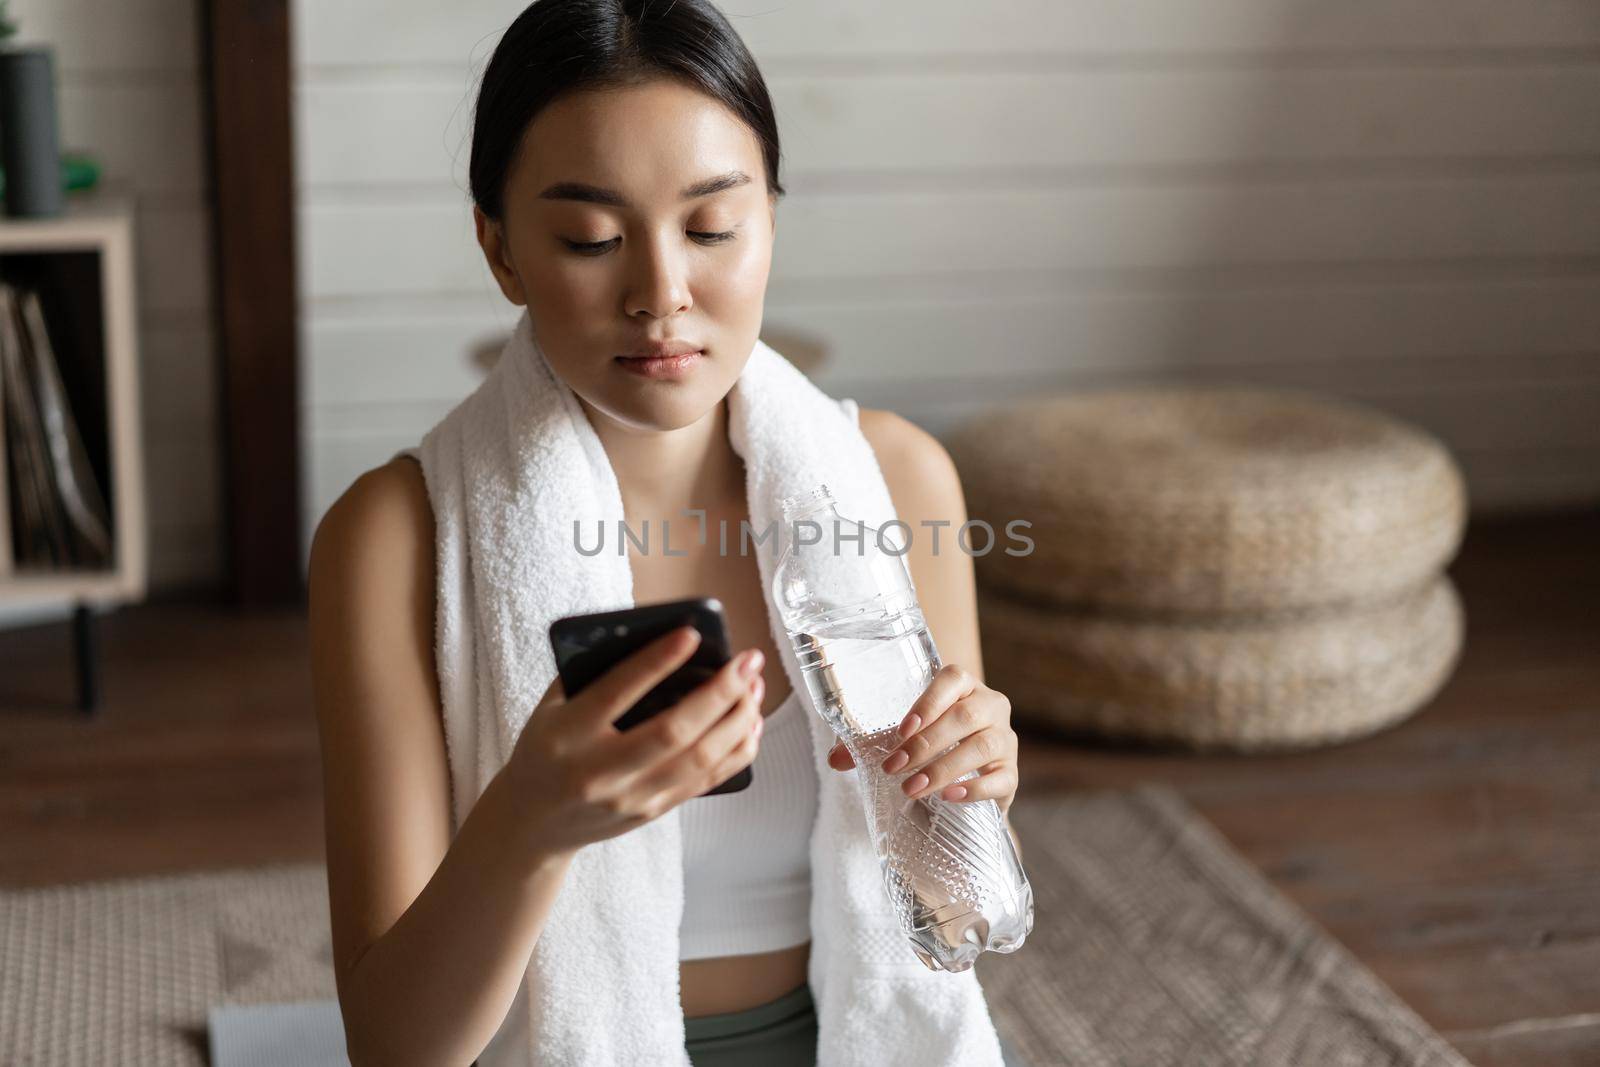 Image of young asian fitness girl with fit body, towel wrapped around neck, looking at mobile phone app, checking application during workout.